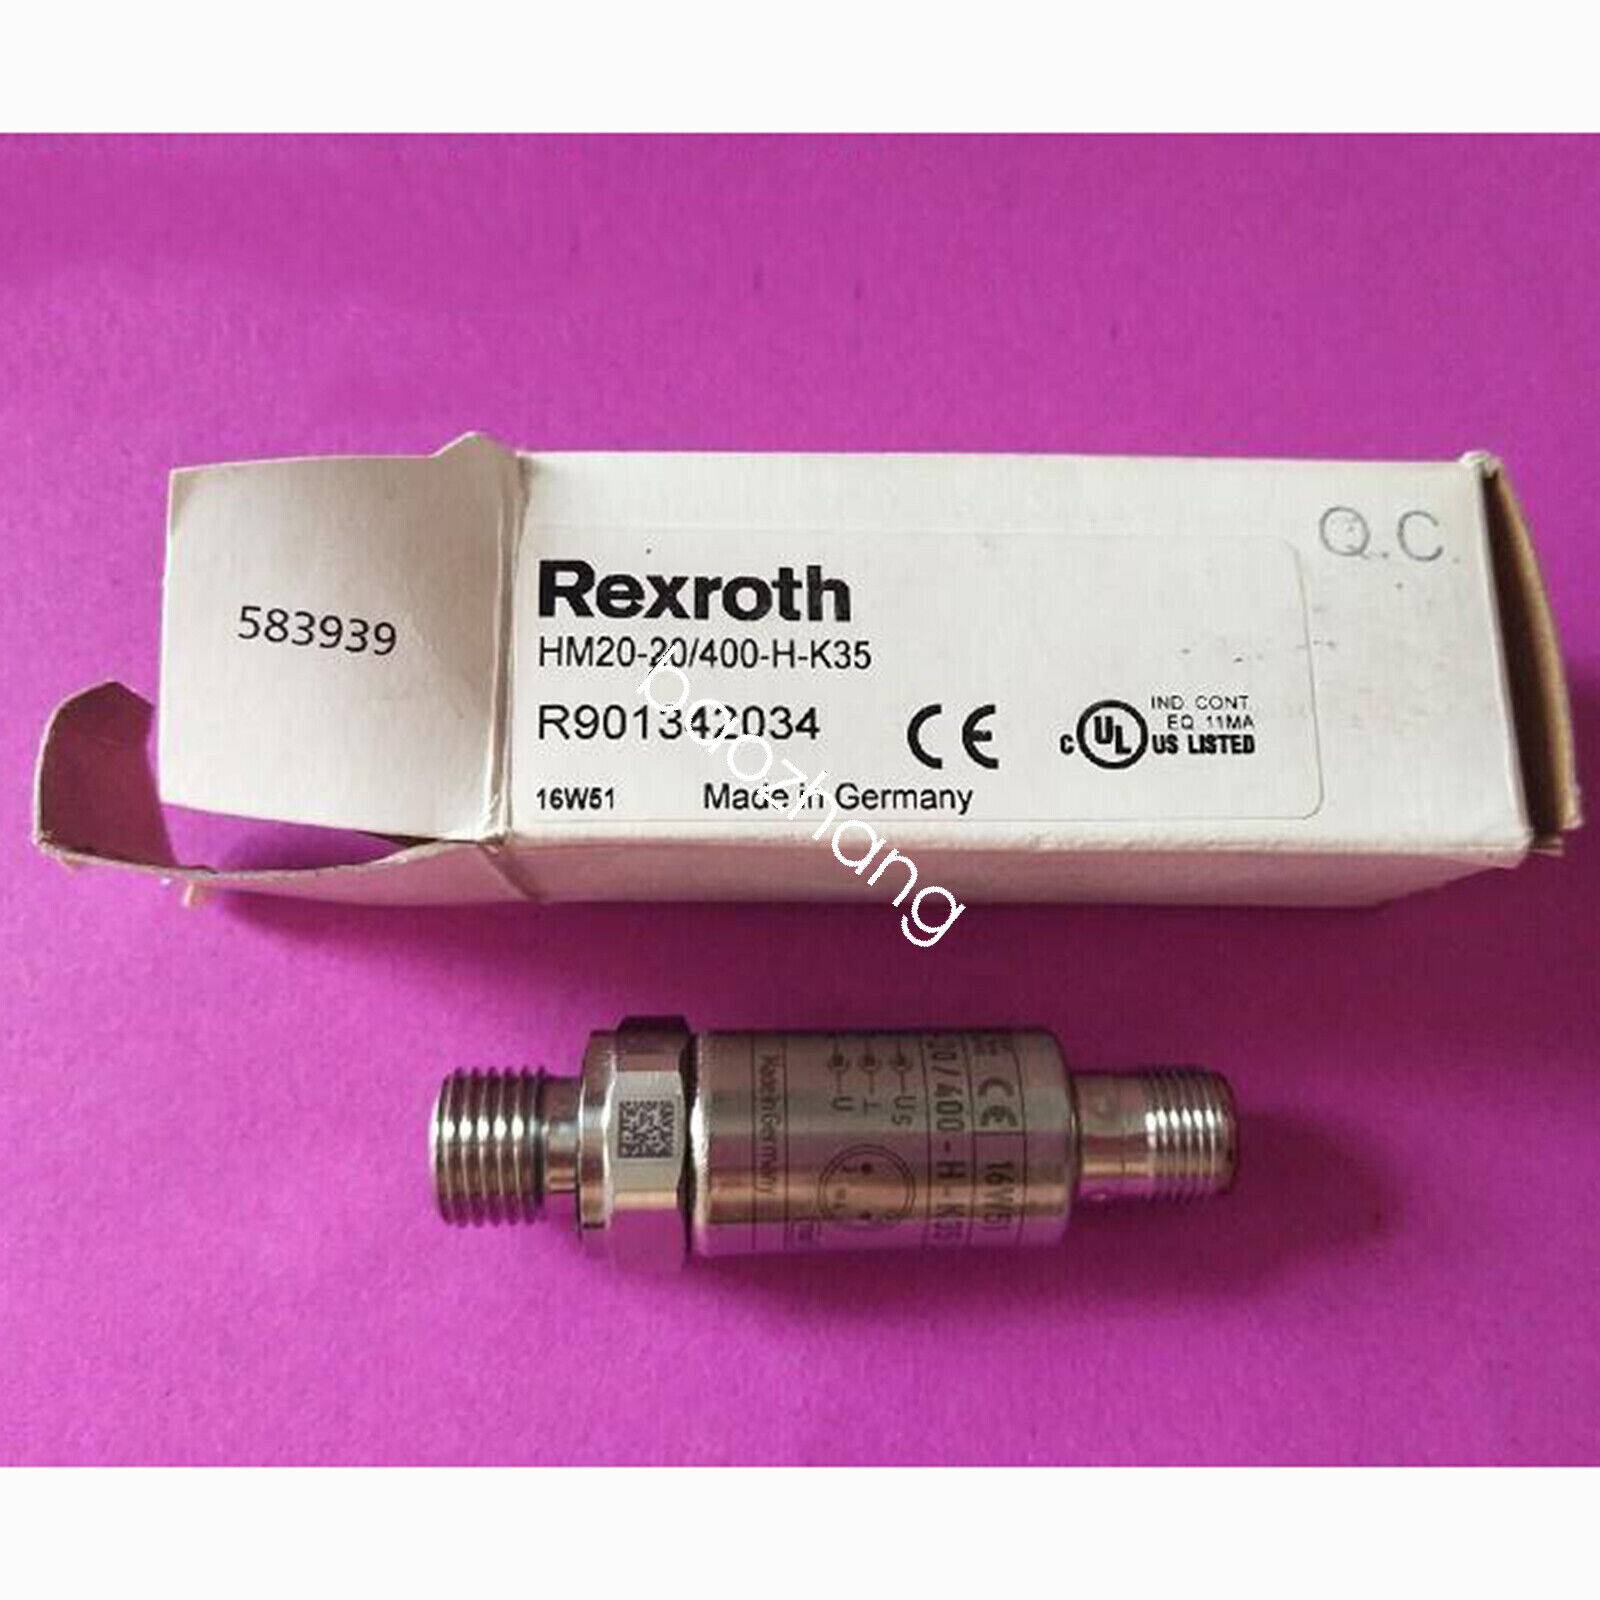 ONE new Rexroth Pressure transducer R901342034 HM20-20/400-H-K35 #YP1